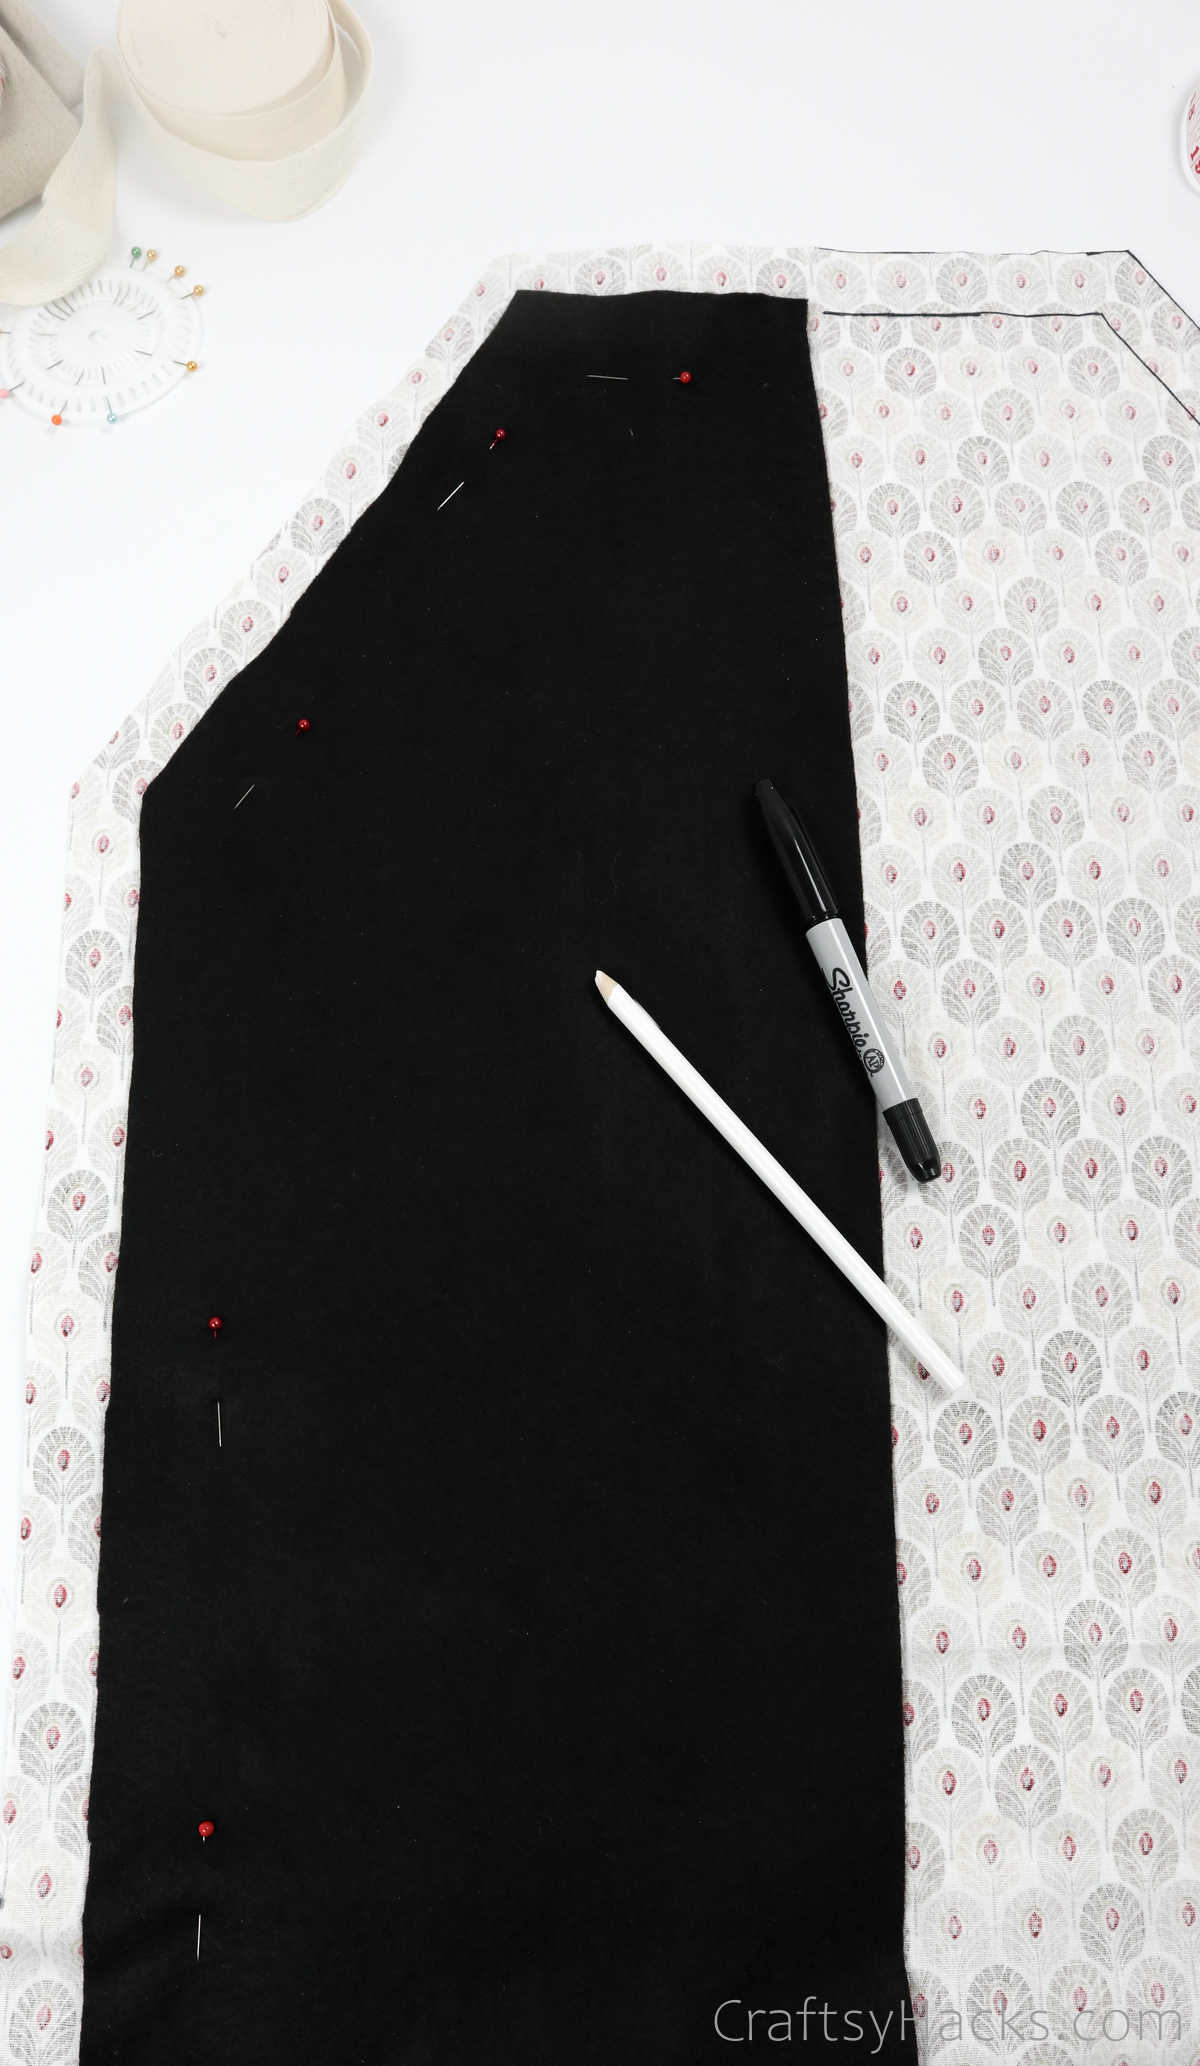 pinning black fabric to other side